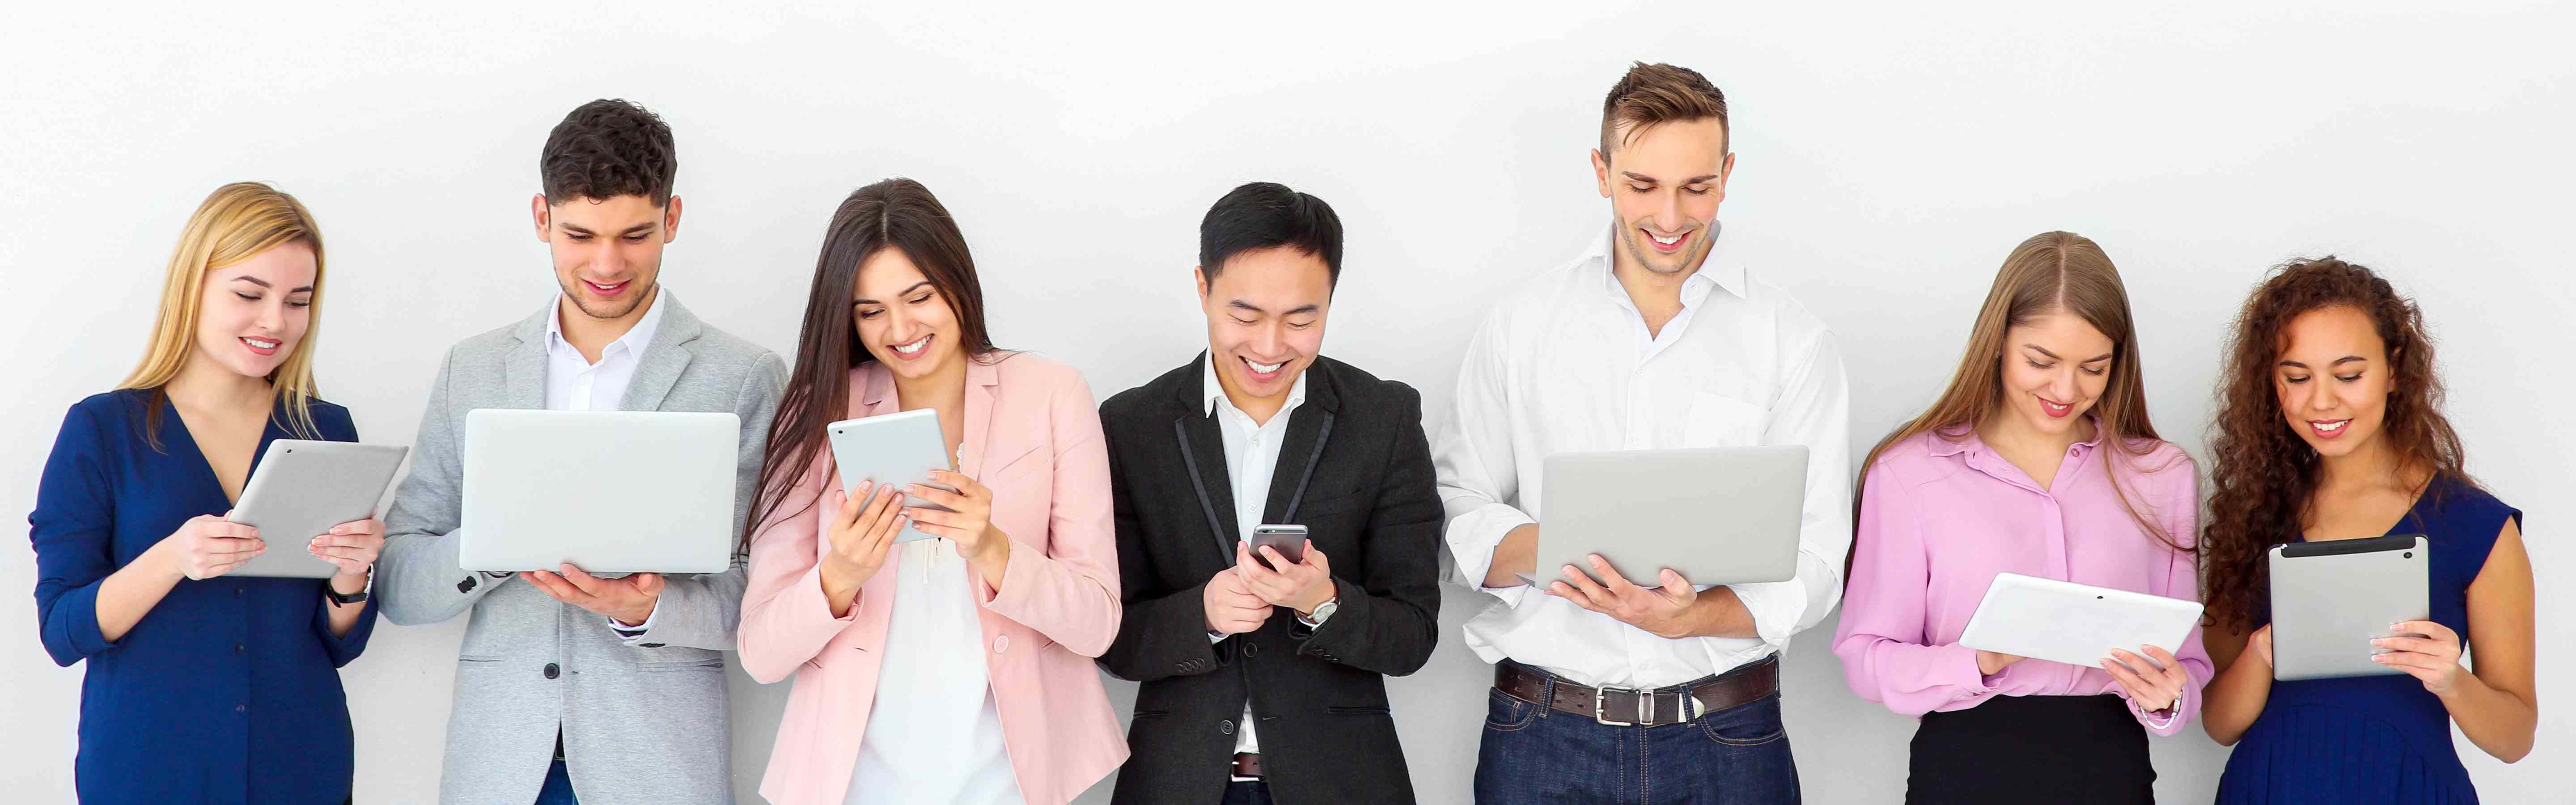 Group of working people on mobile devices